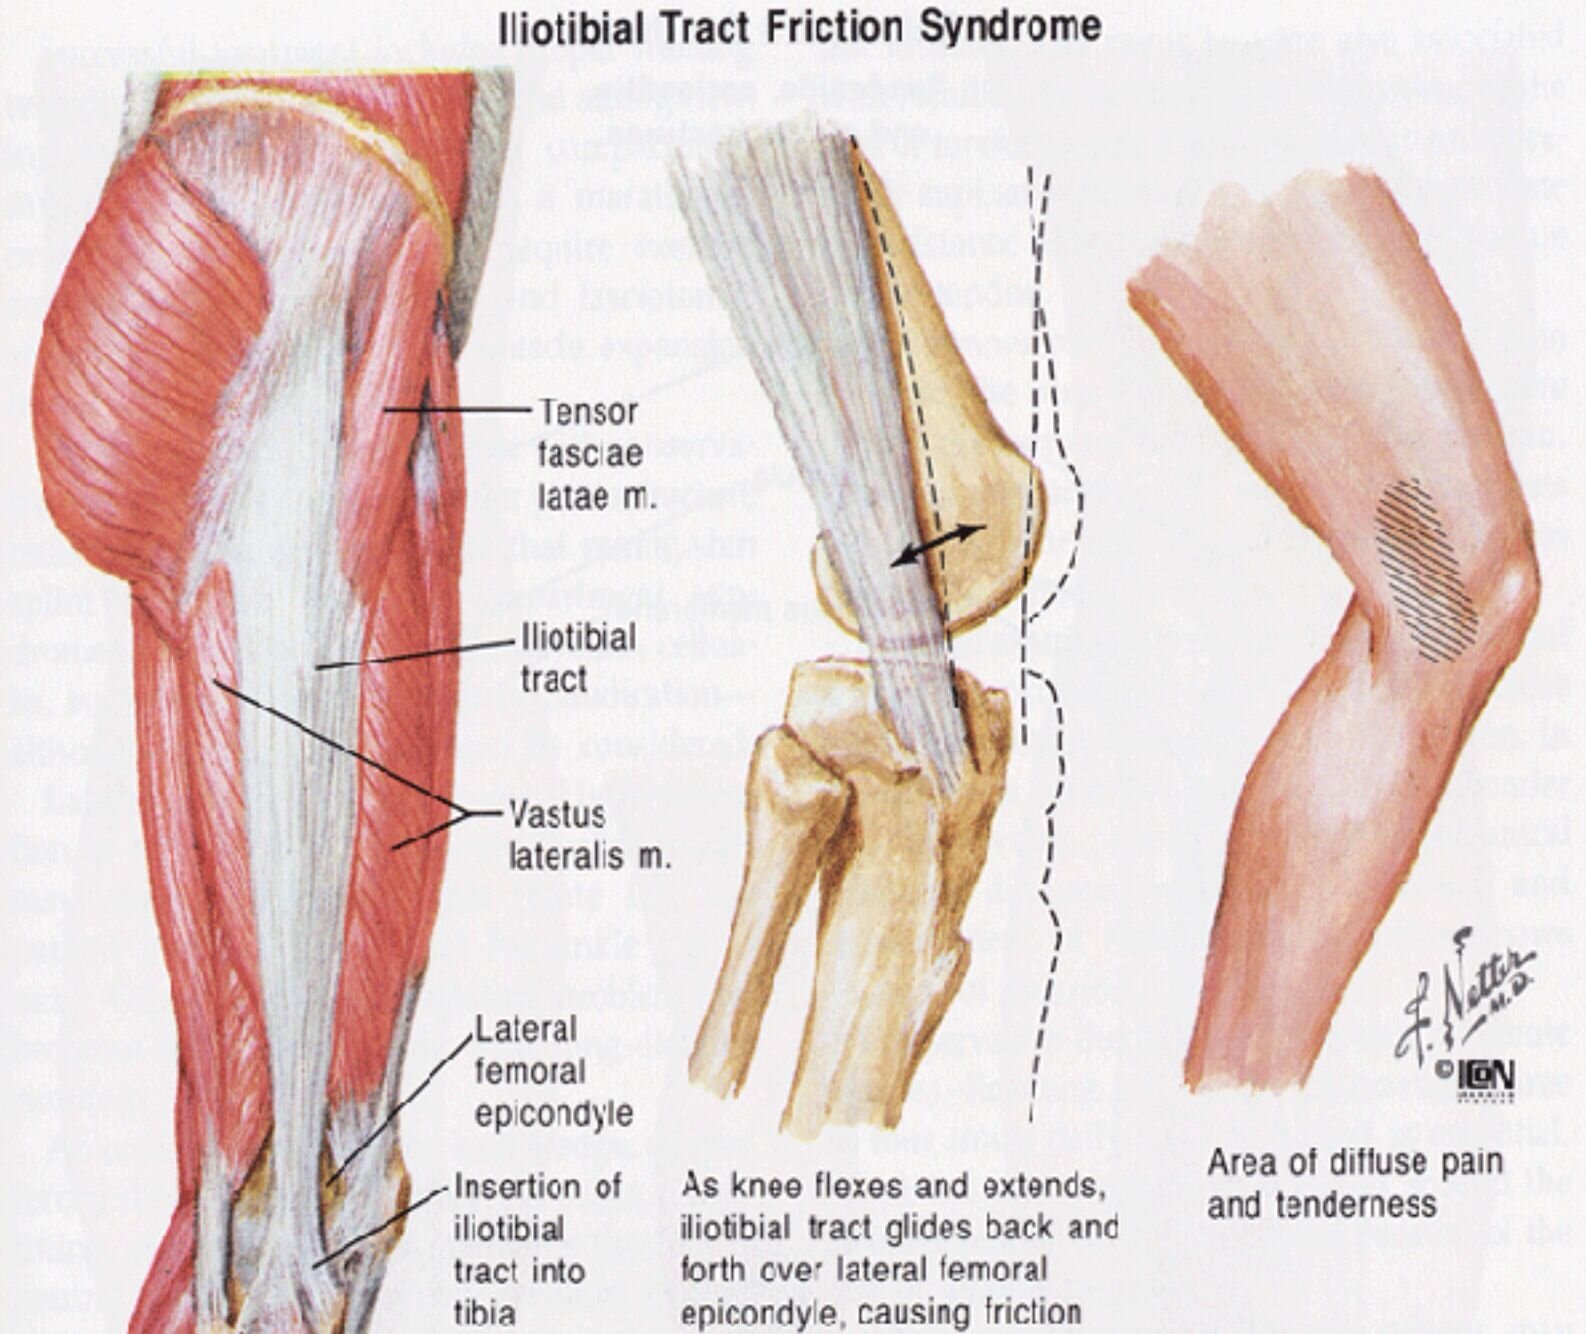 Iliotibial tract syndrome